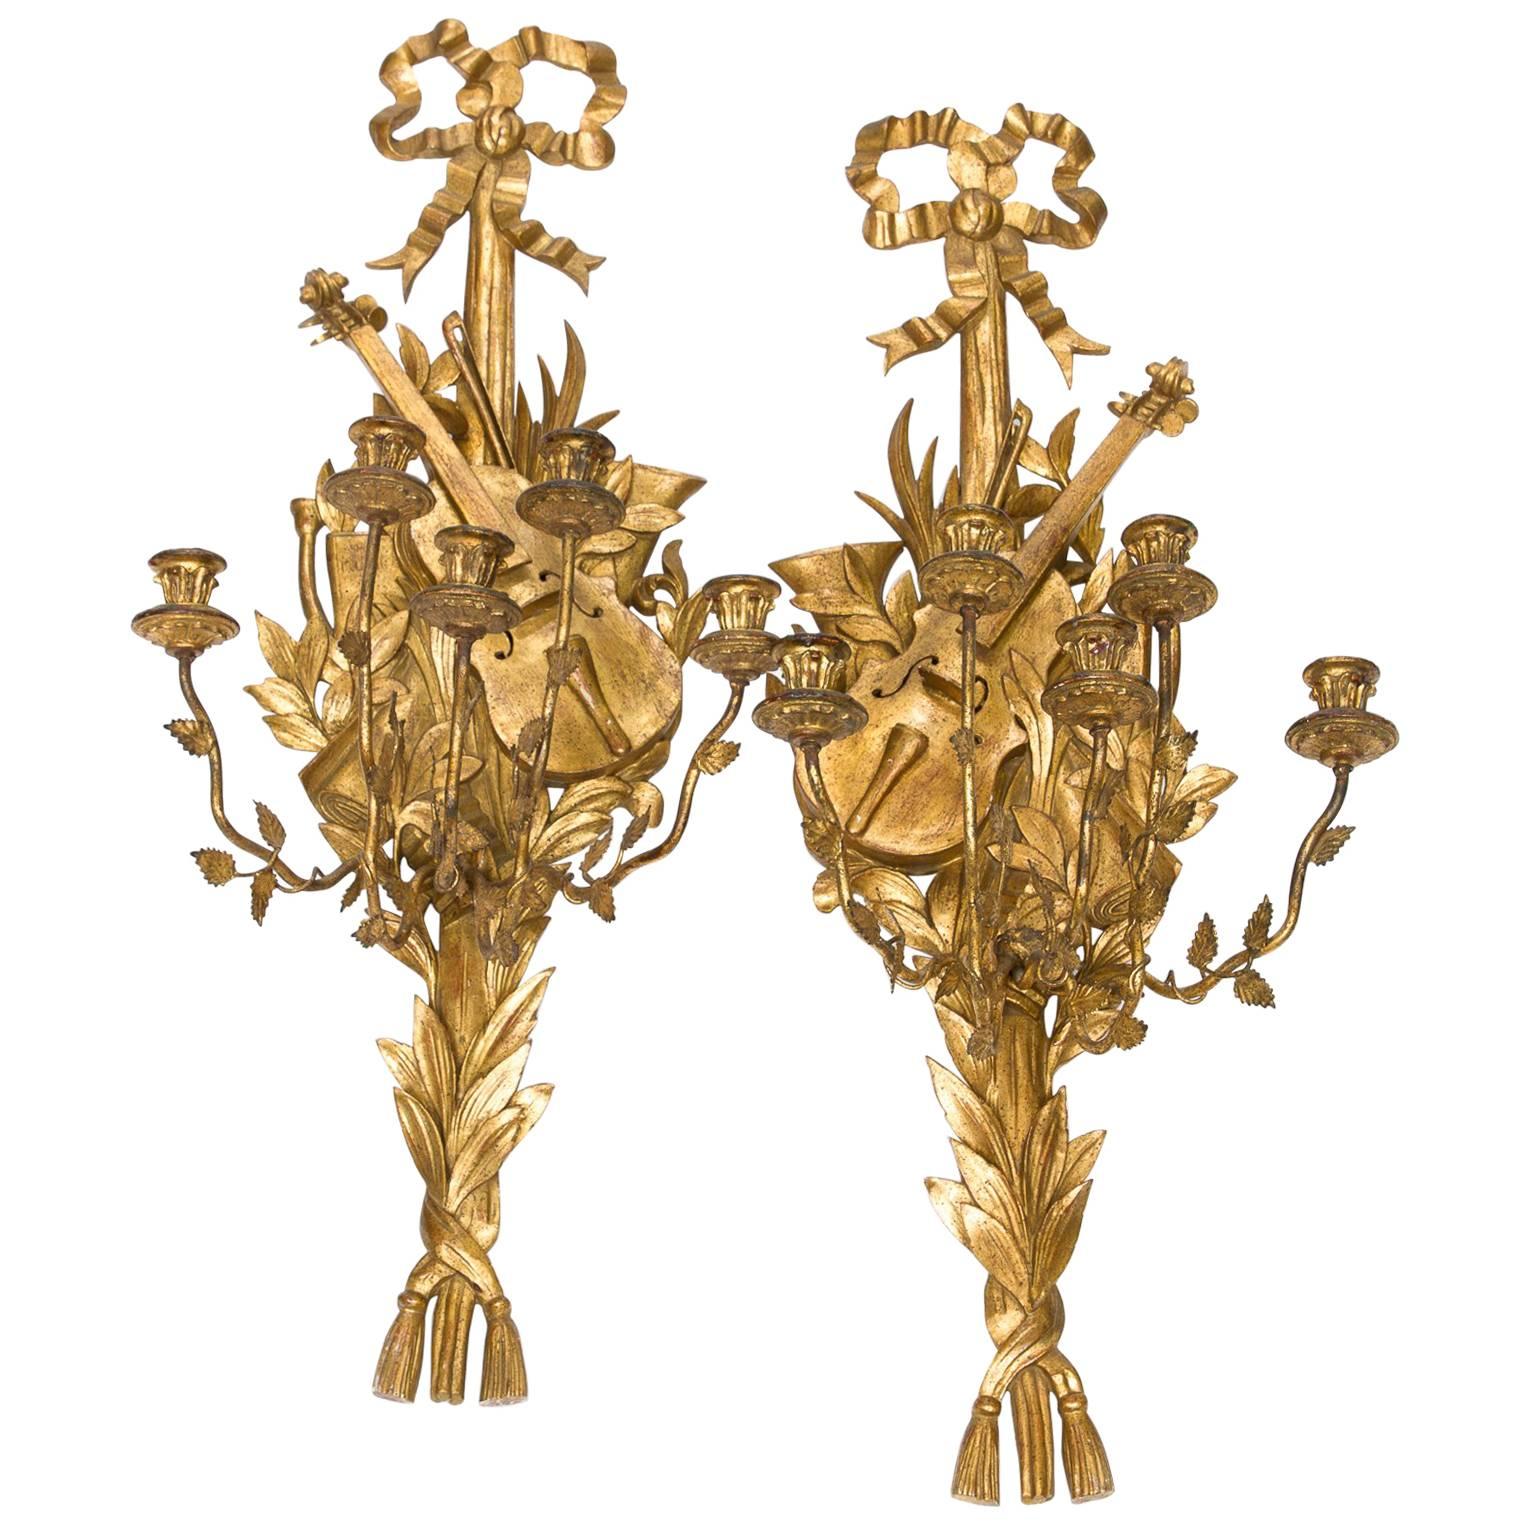 Vintage Pair of Wall Sconces